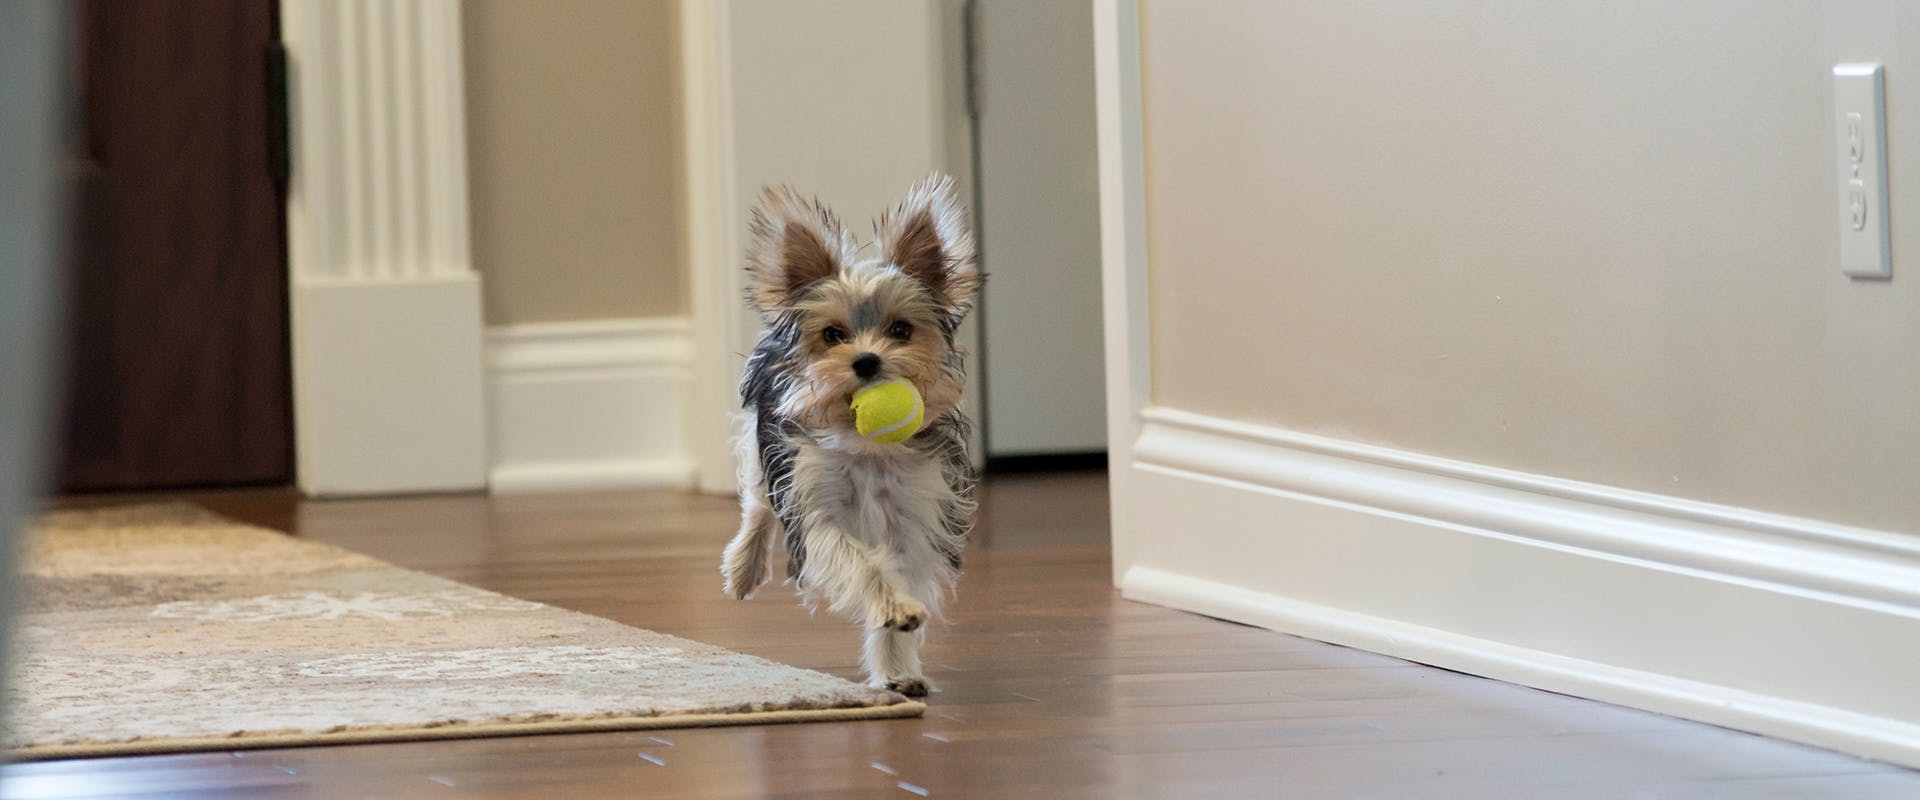 A small dog with the zoomies, running through a house with a ball in its mouth